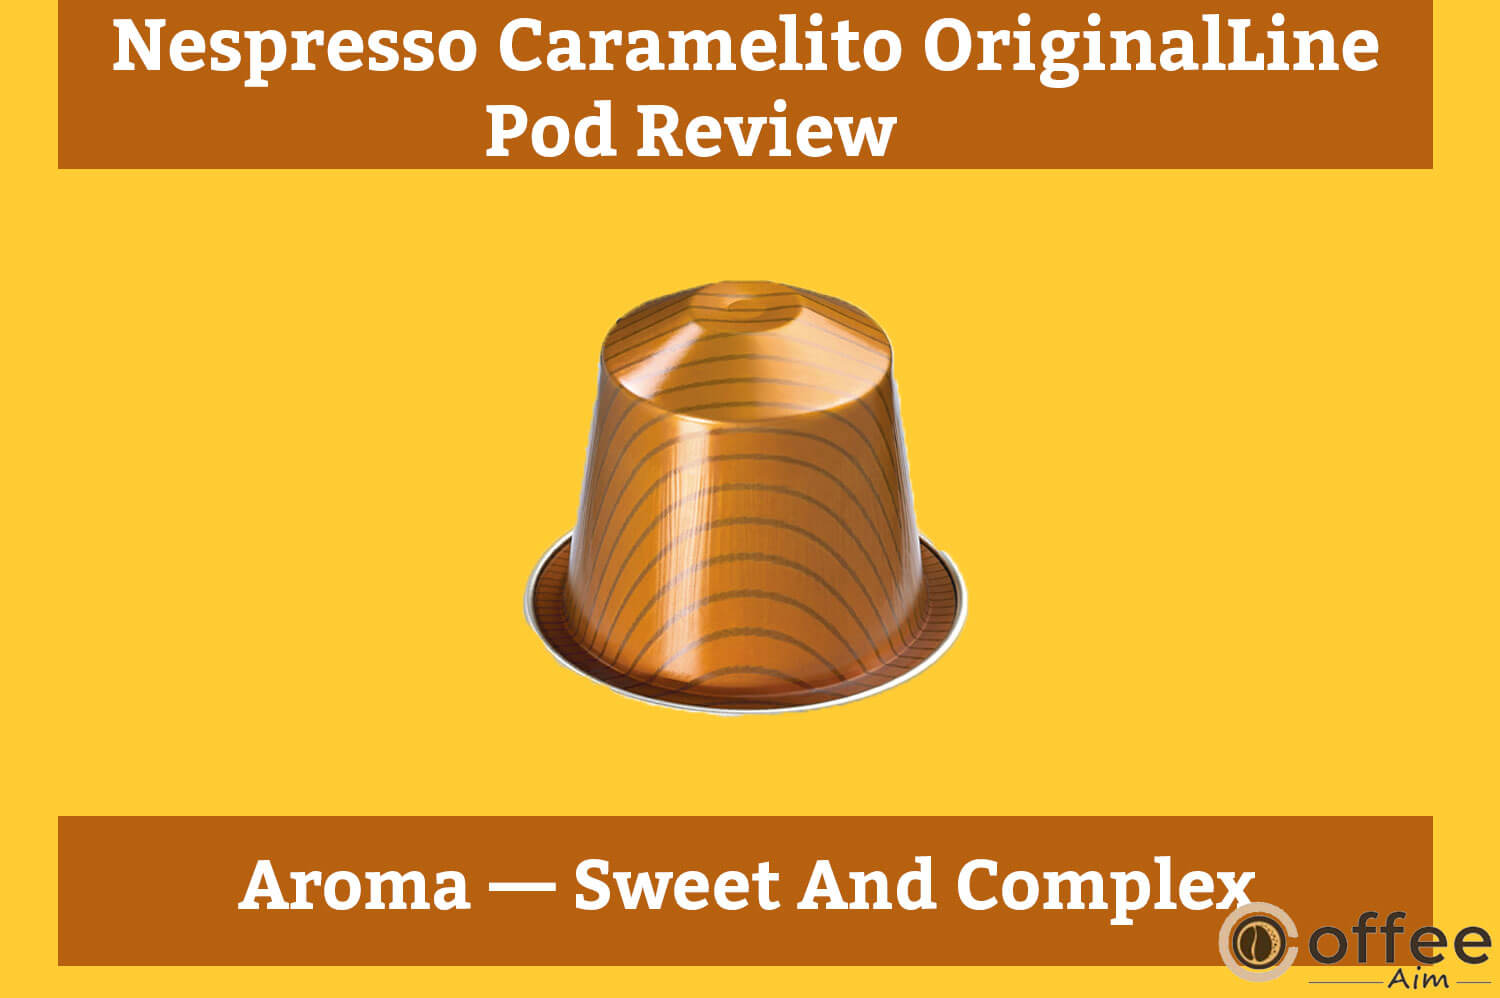 The image depicts the aromatic profile of "Nespresso Caramelito OriginalLine Pod," a focus within the article "Nespresso Caramelito OriginalLine Pod Review."